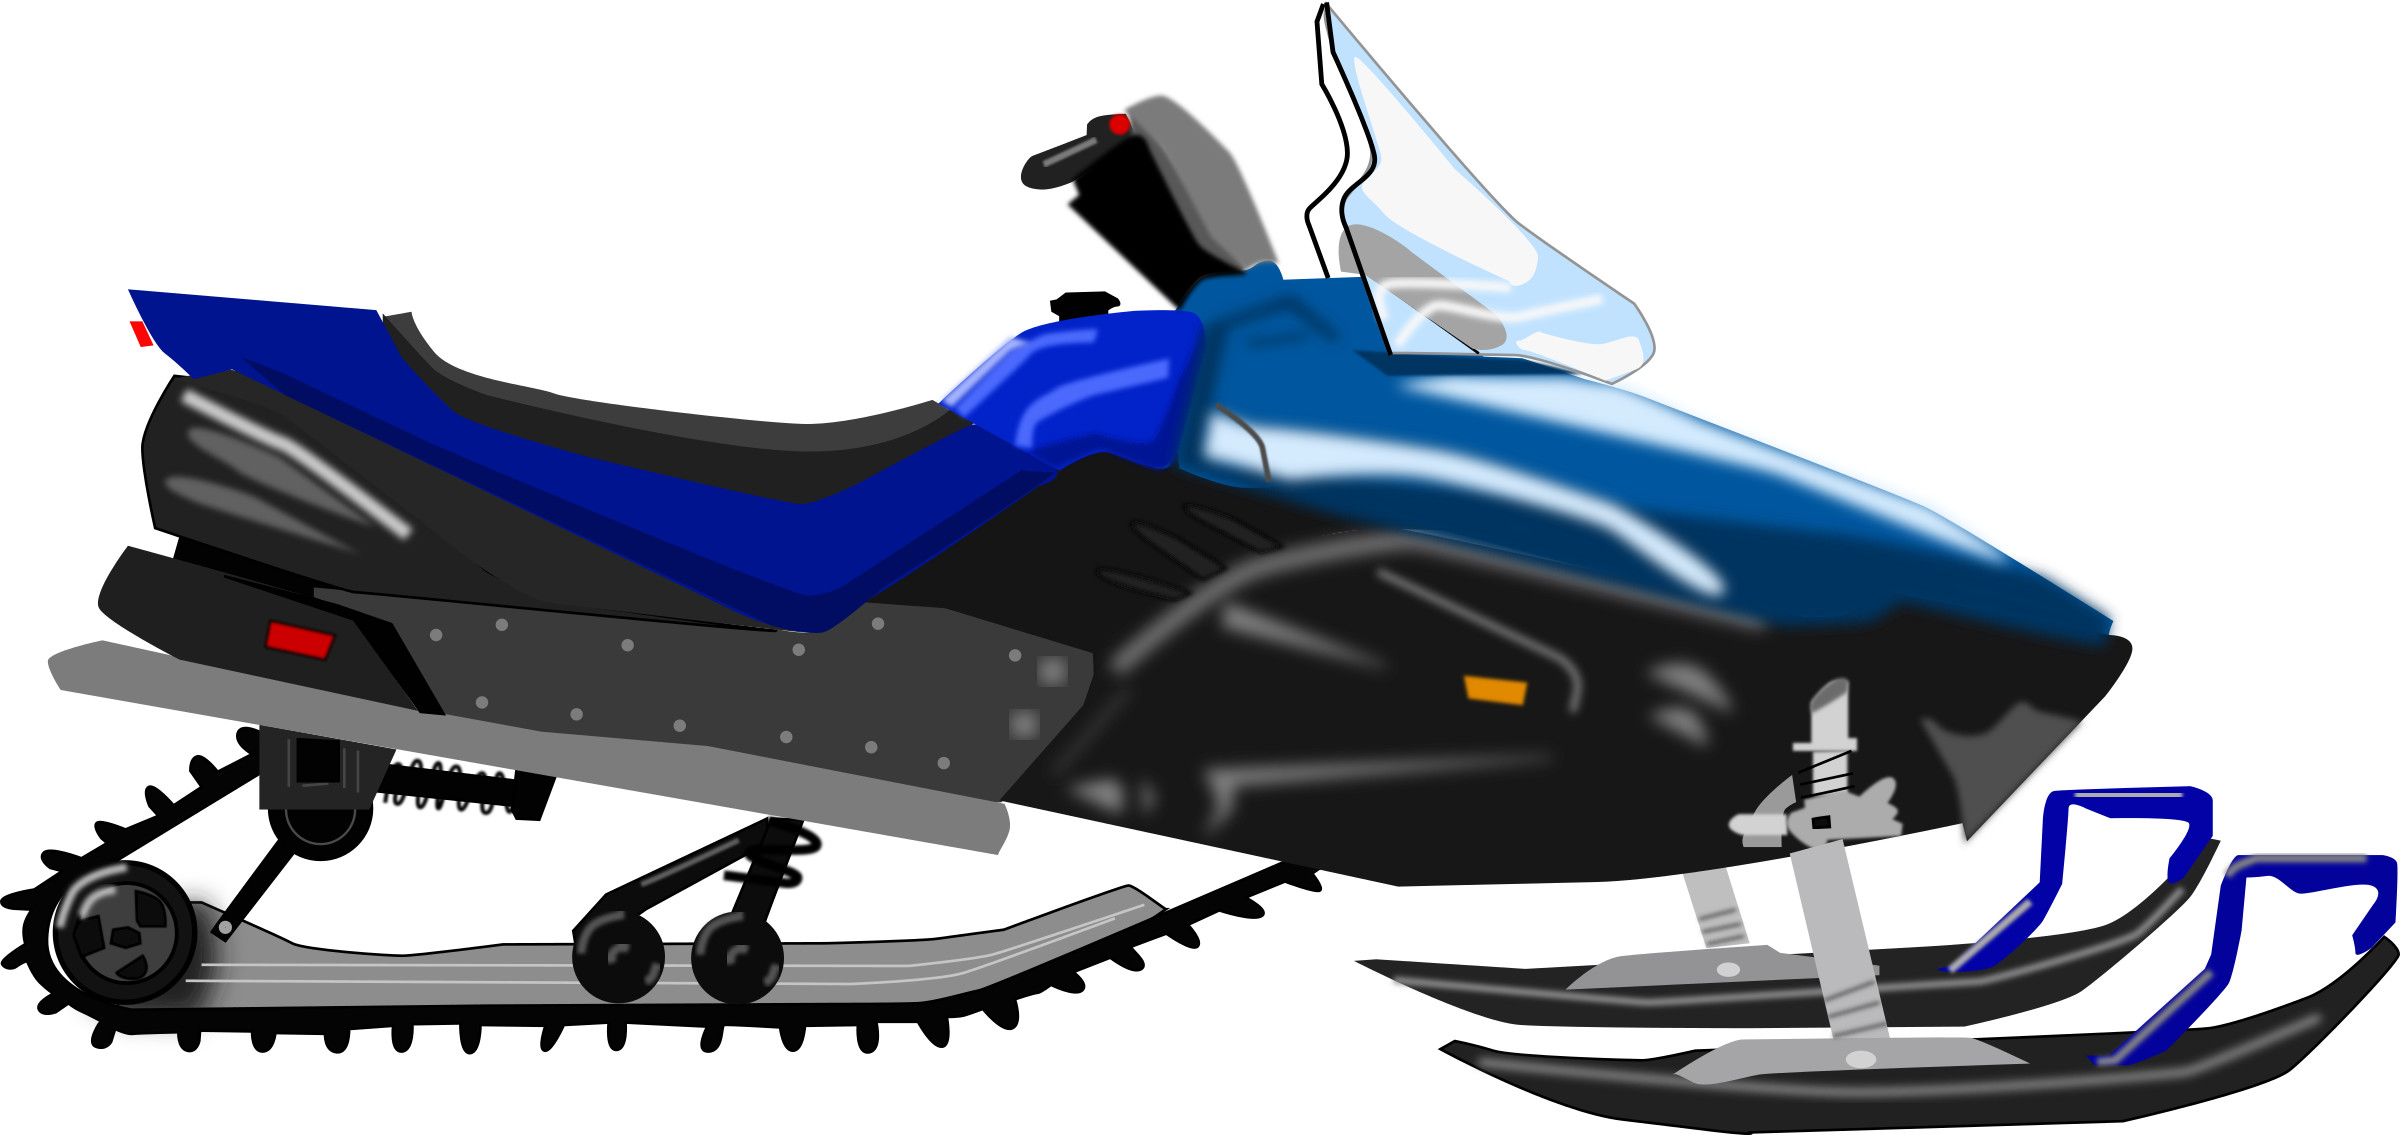 2400x1135 People on a snowmobile | store 520.7 Kbyte | C-78708095